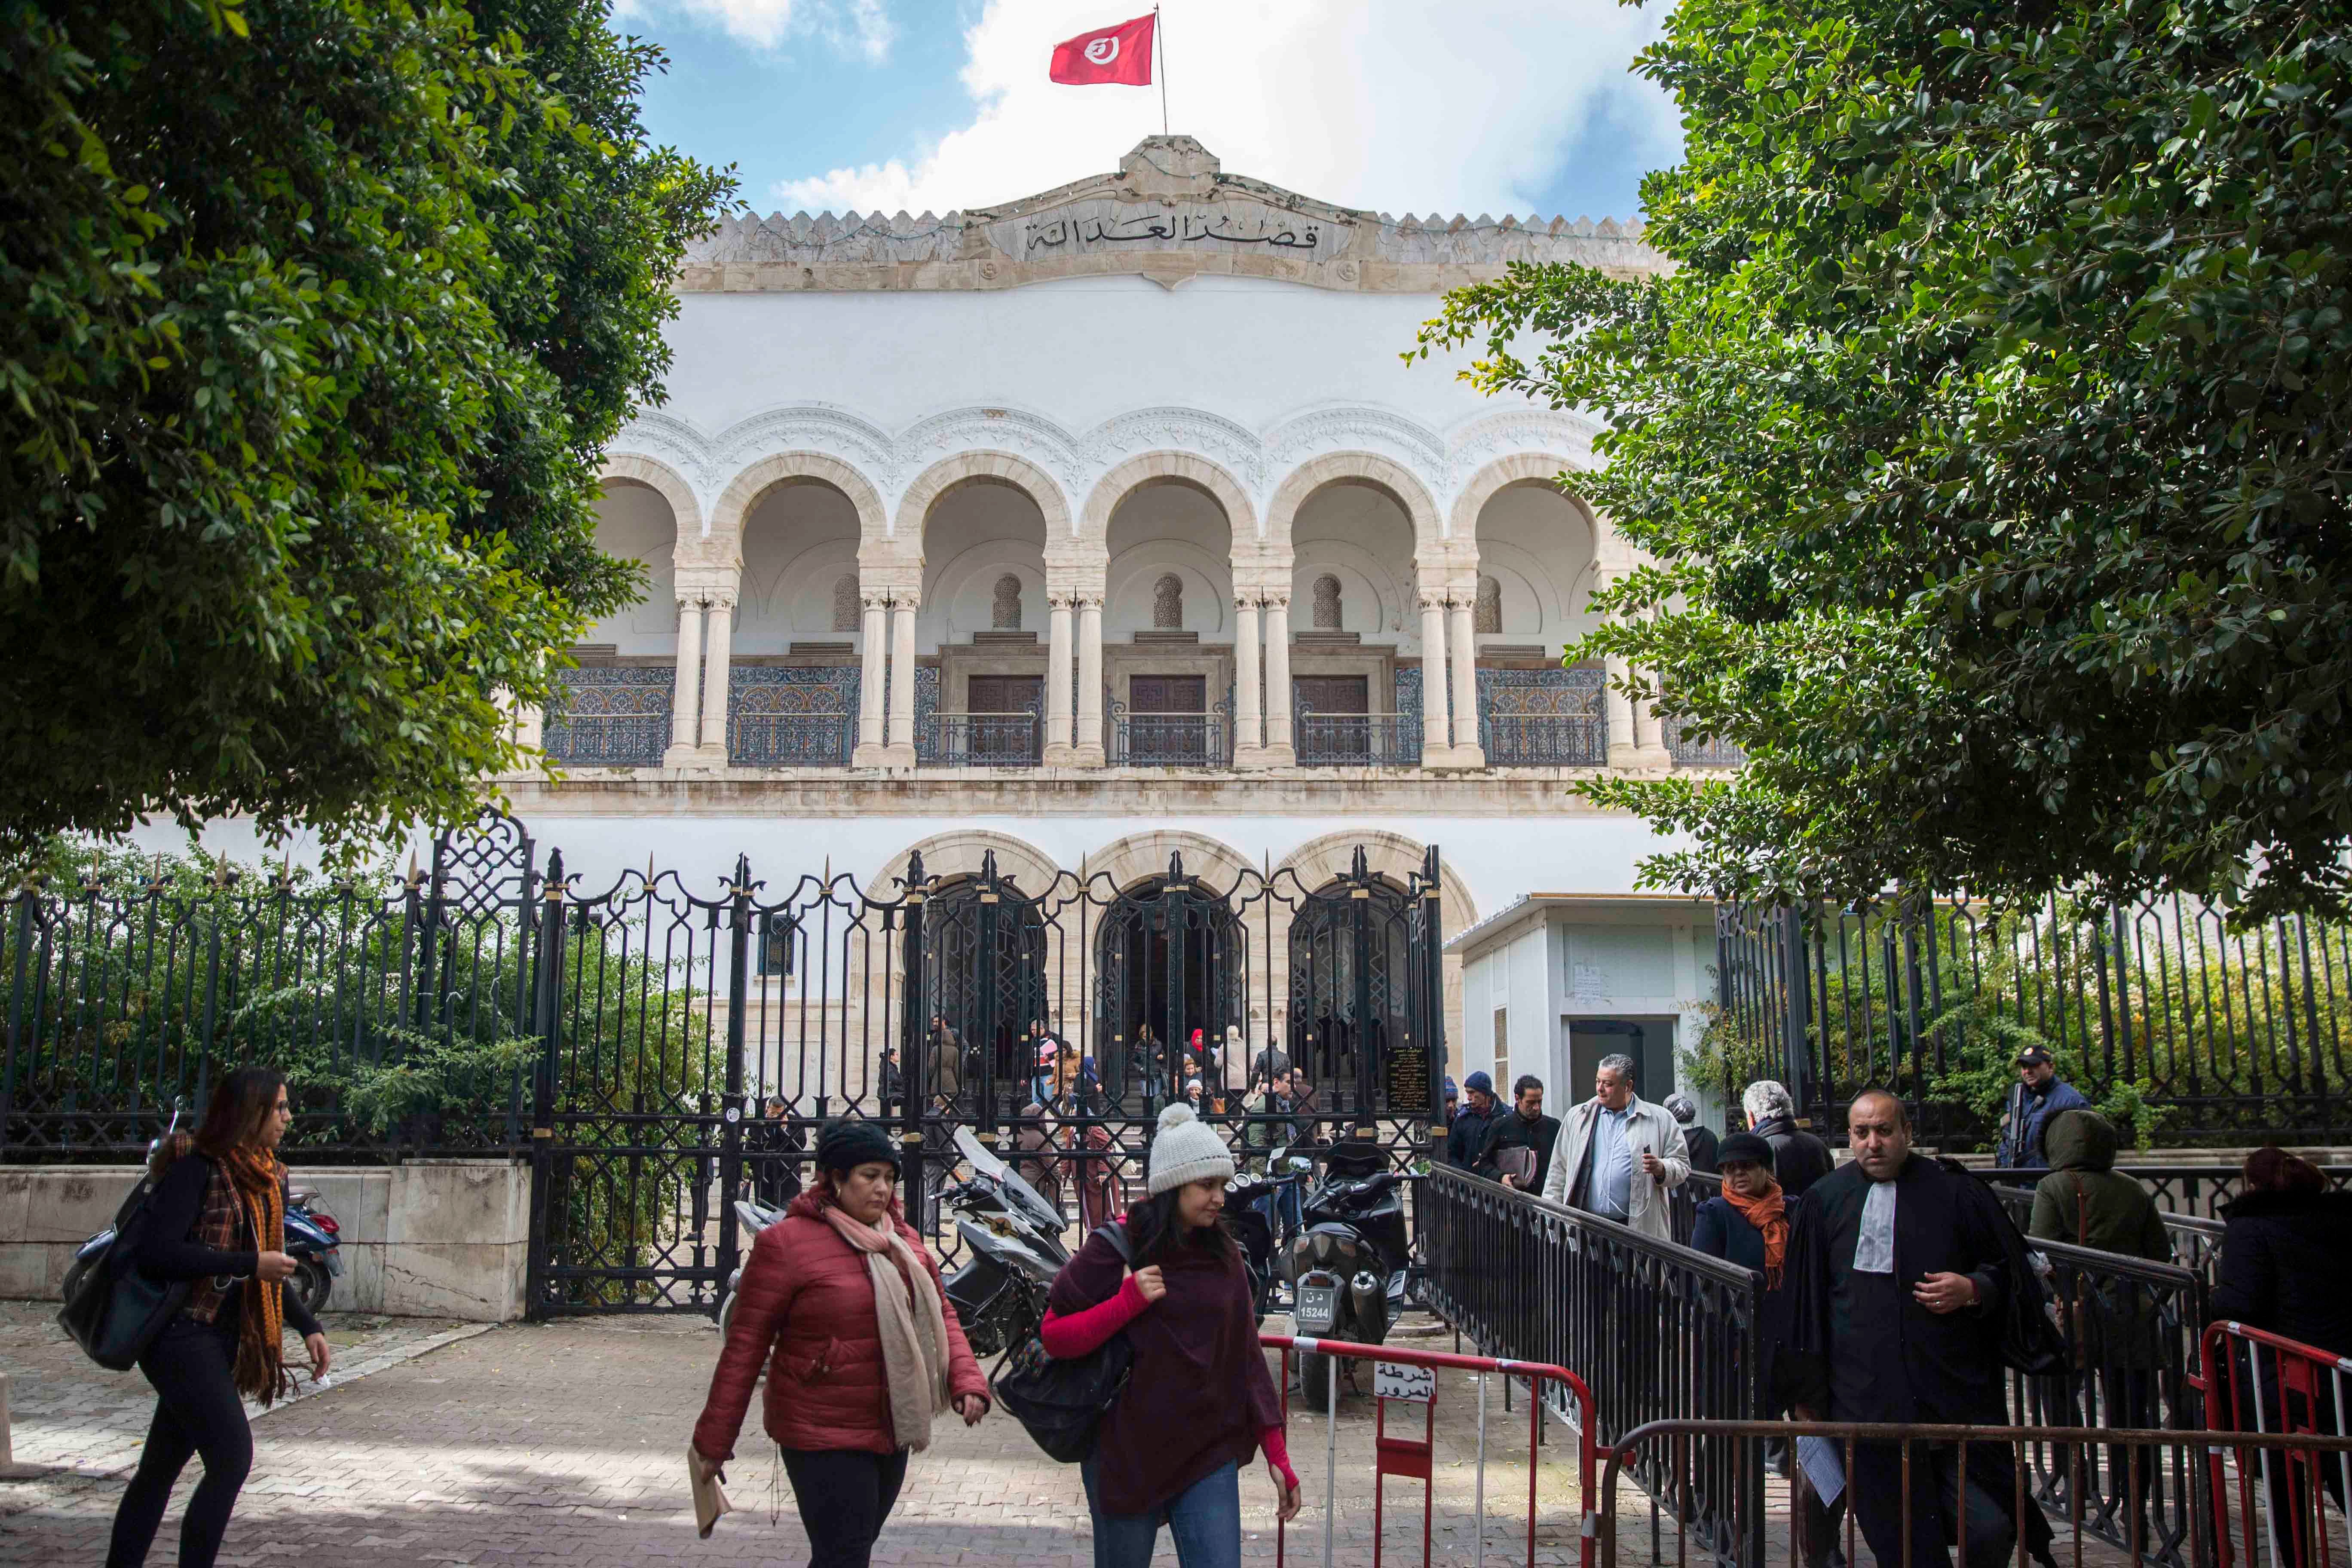 The Palace of Justice in Tunis, Tunisia, on January 29, 2019.